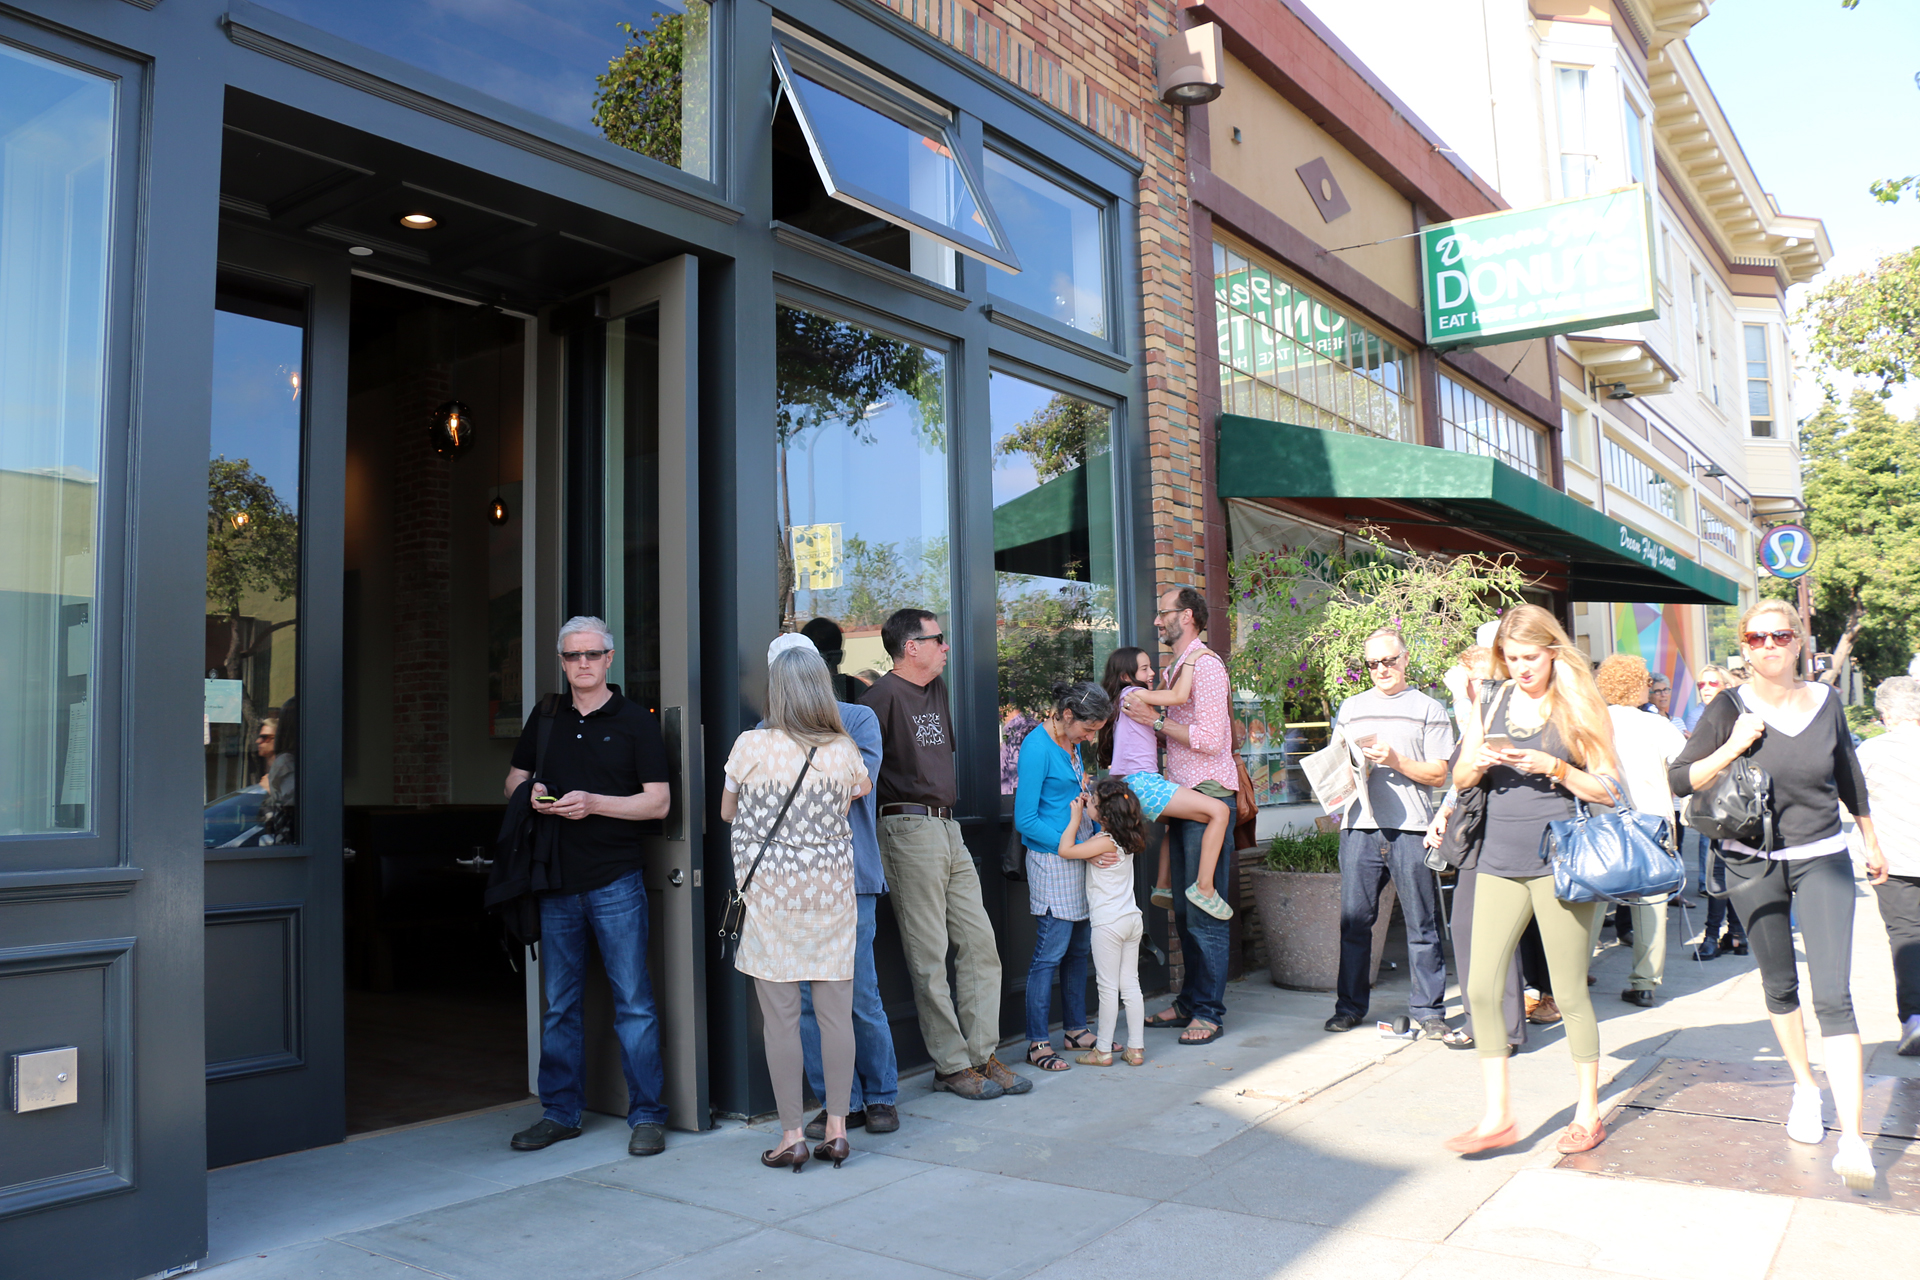 Lining up for the opening of The Advocate in Berkeley’s Elmwood neighborhood.